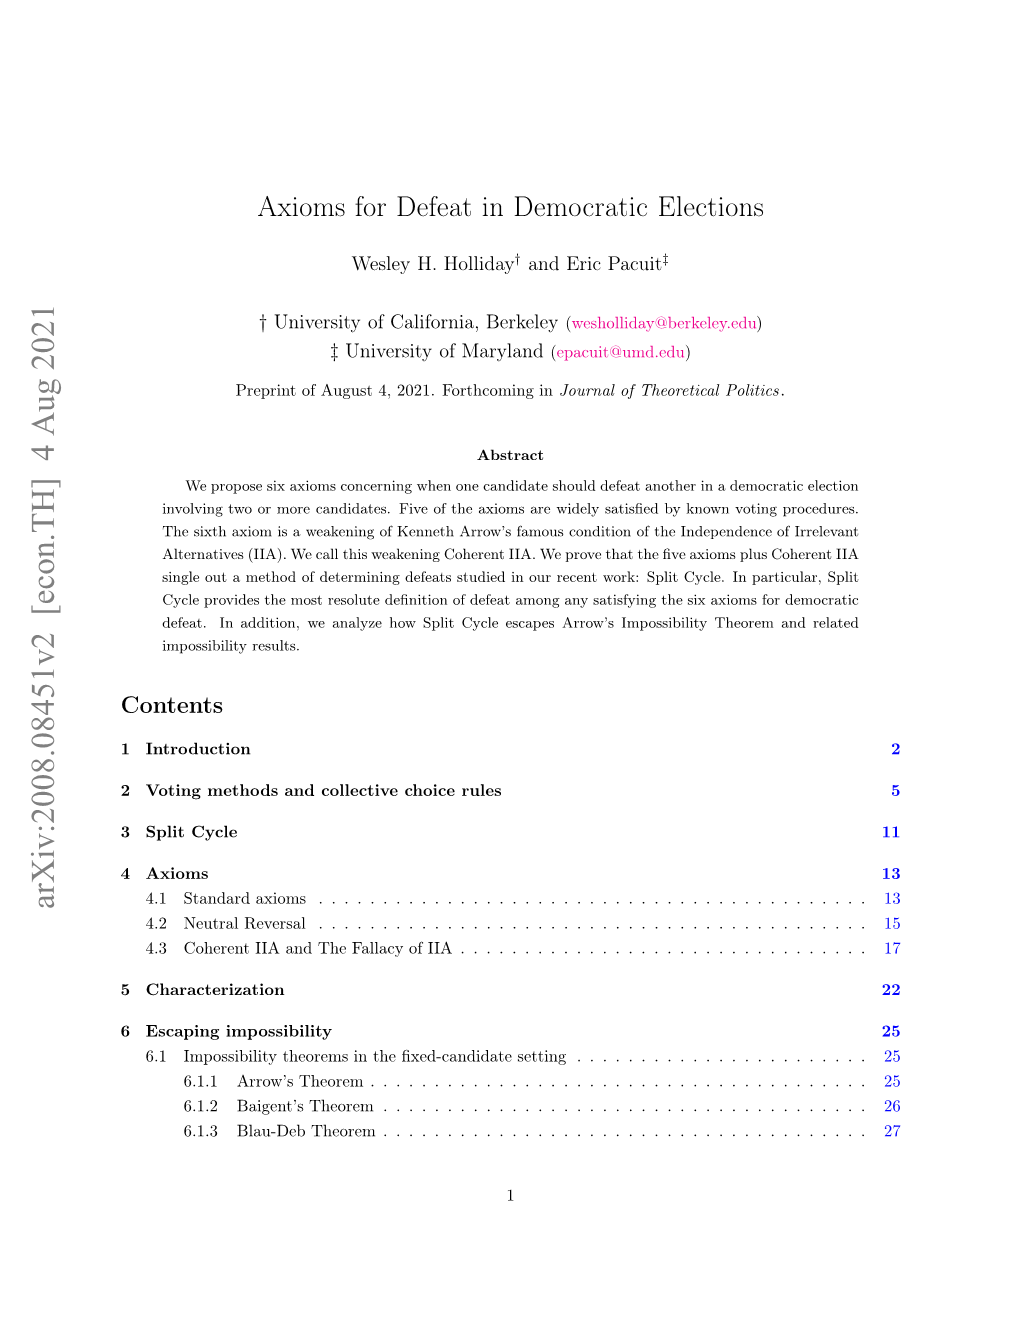 Axioms for Defeat in Democratic Elections